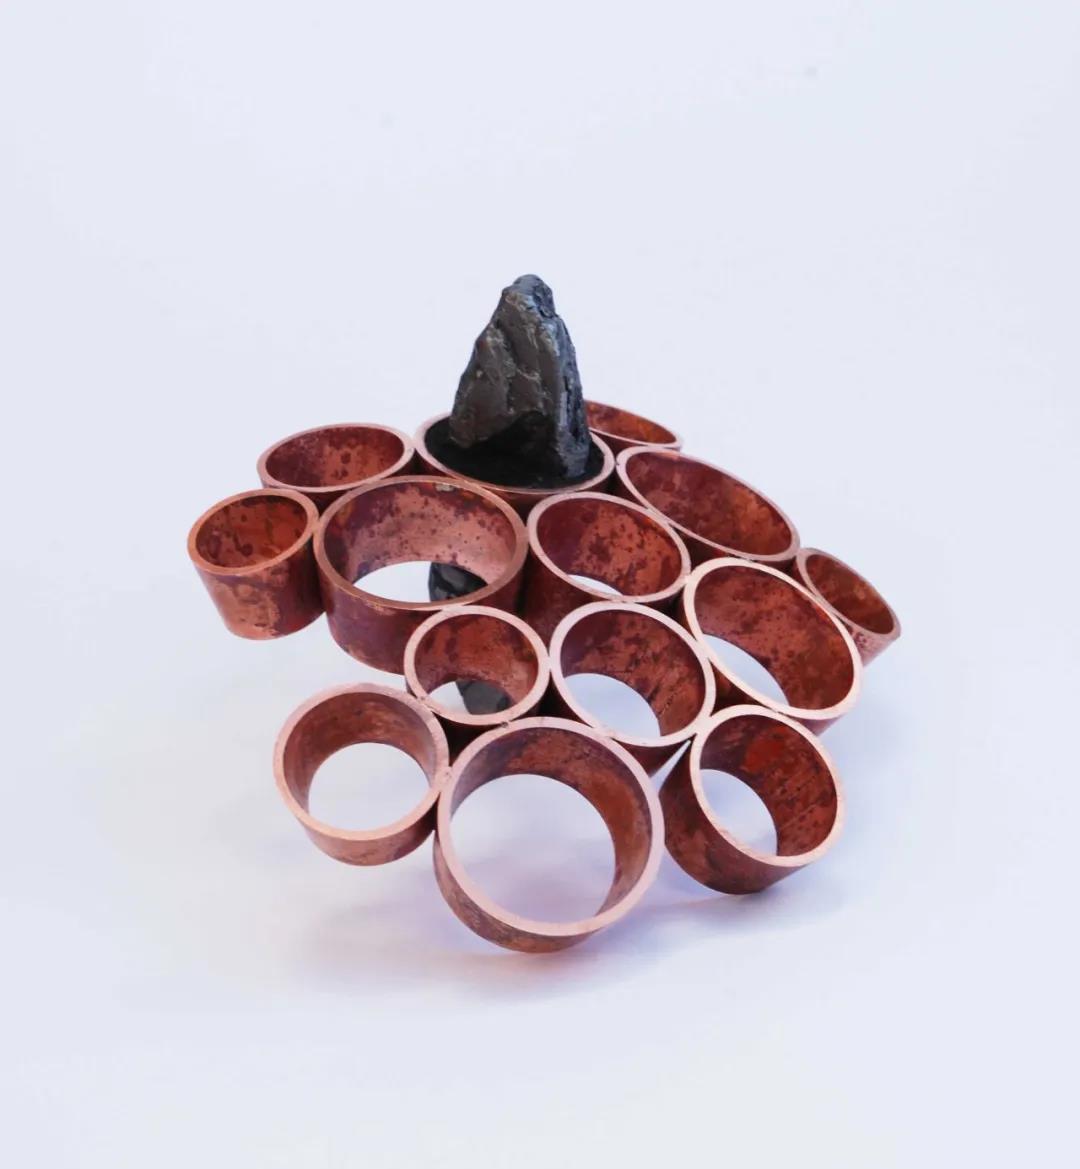 Rings for collaborative drawing 